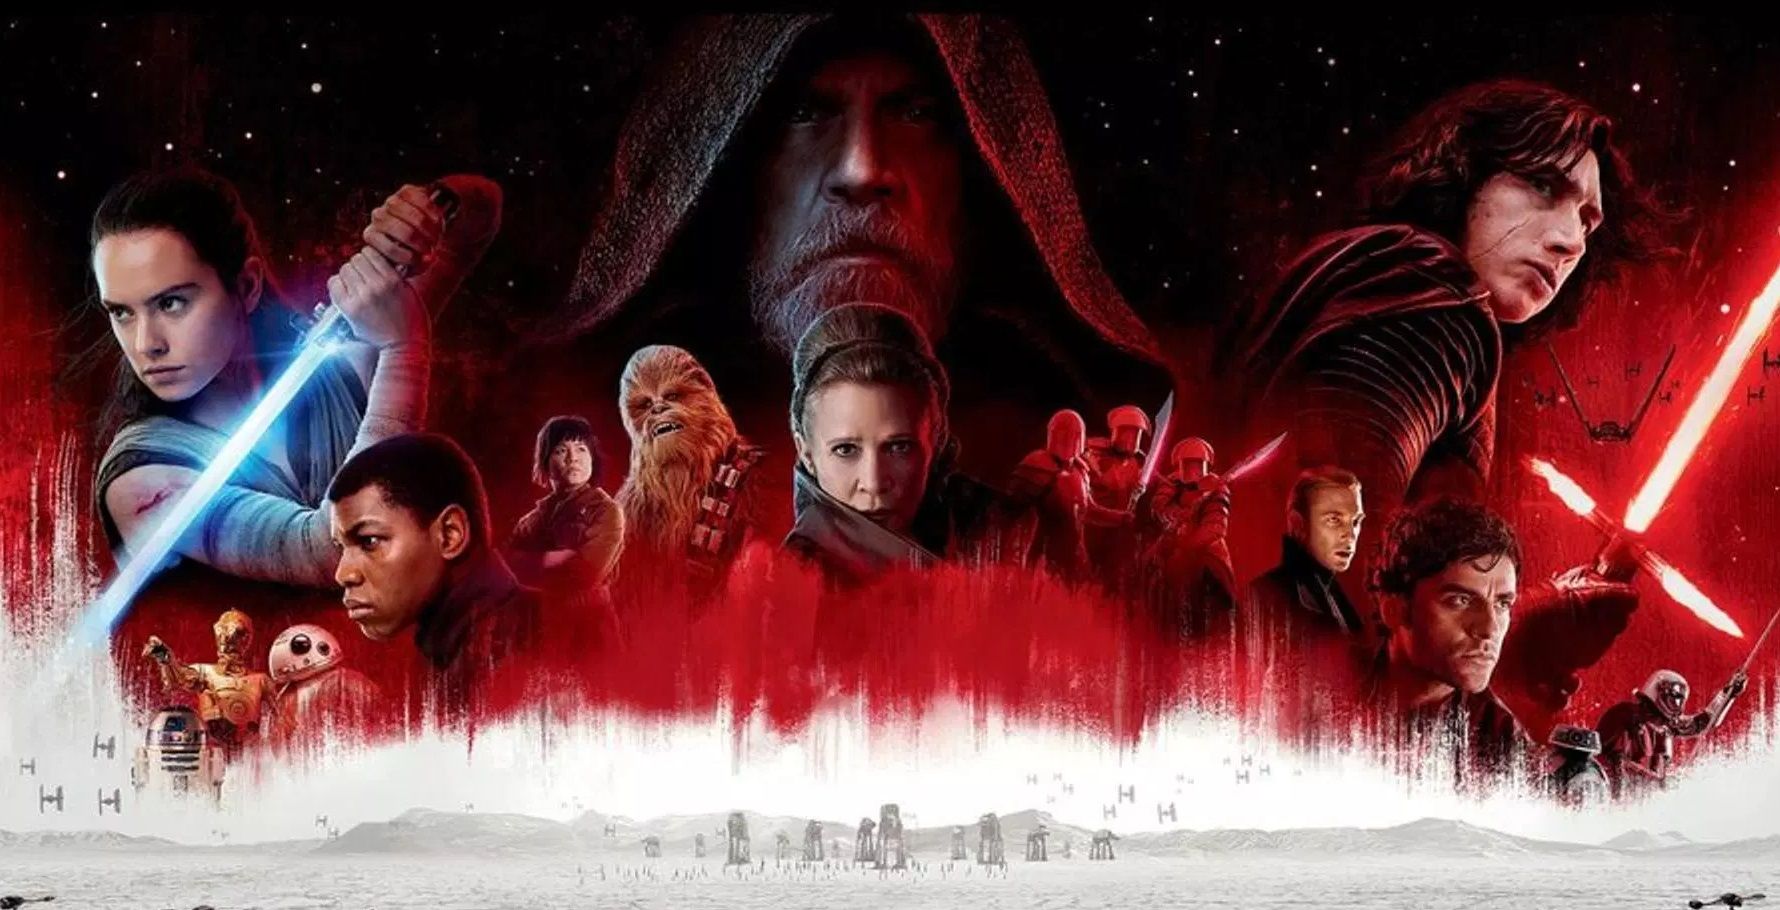 5 Ways The Last Jedi Made Star Wars Worse (And 5 Ways It Made It Better)